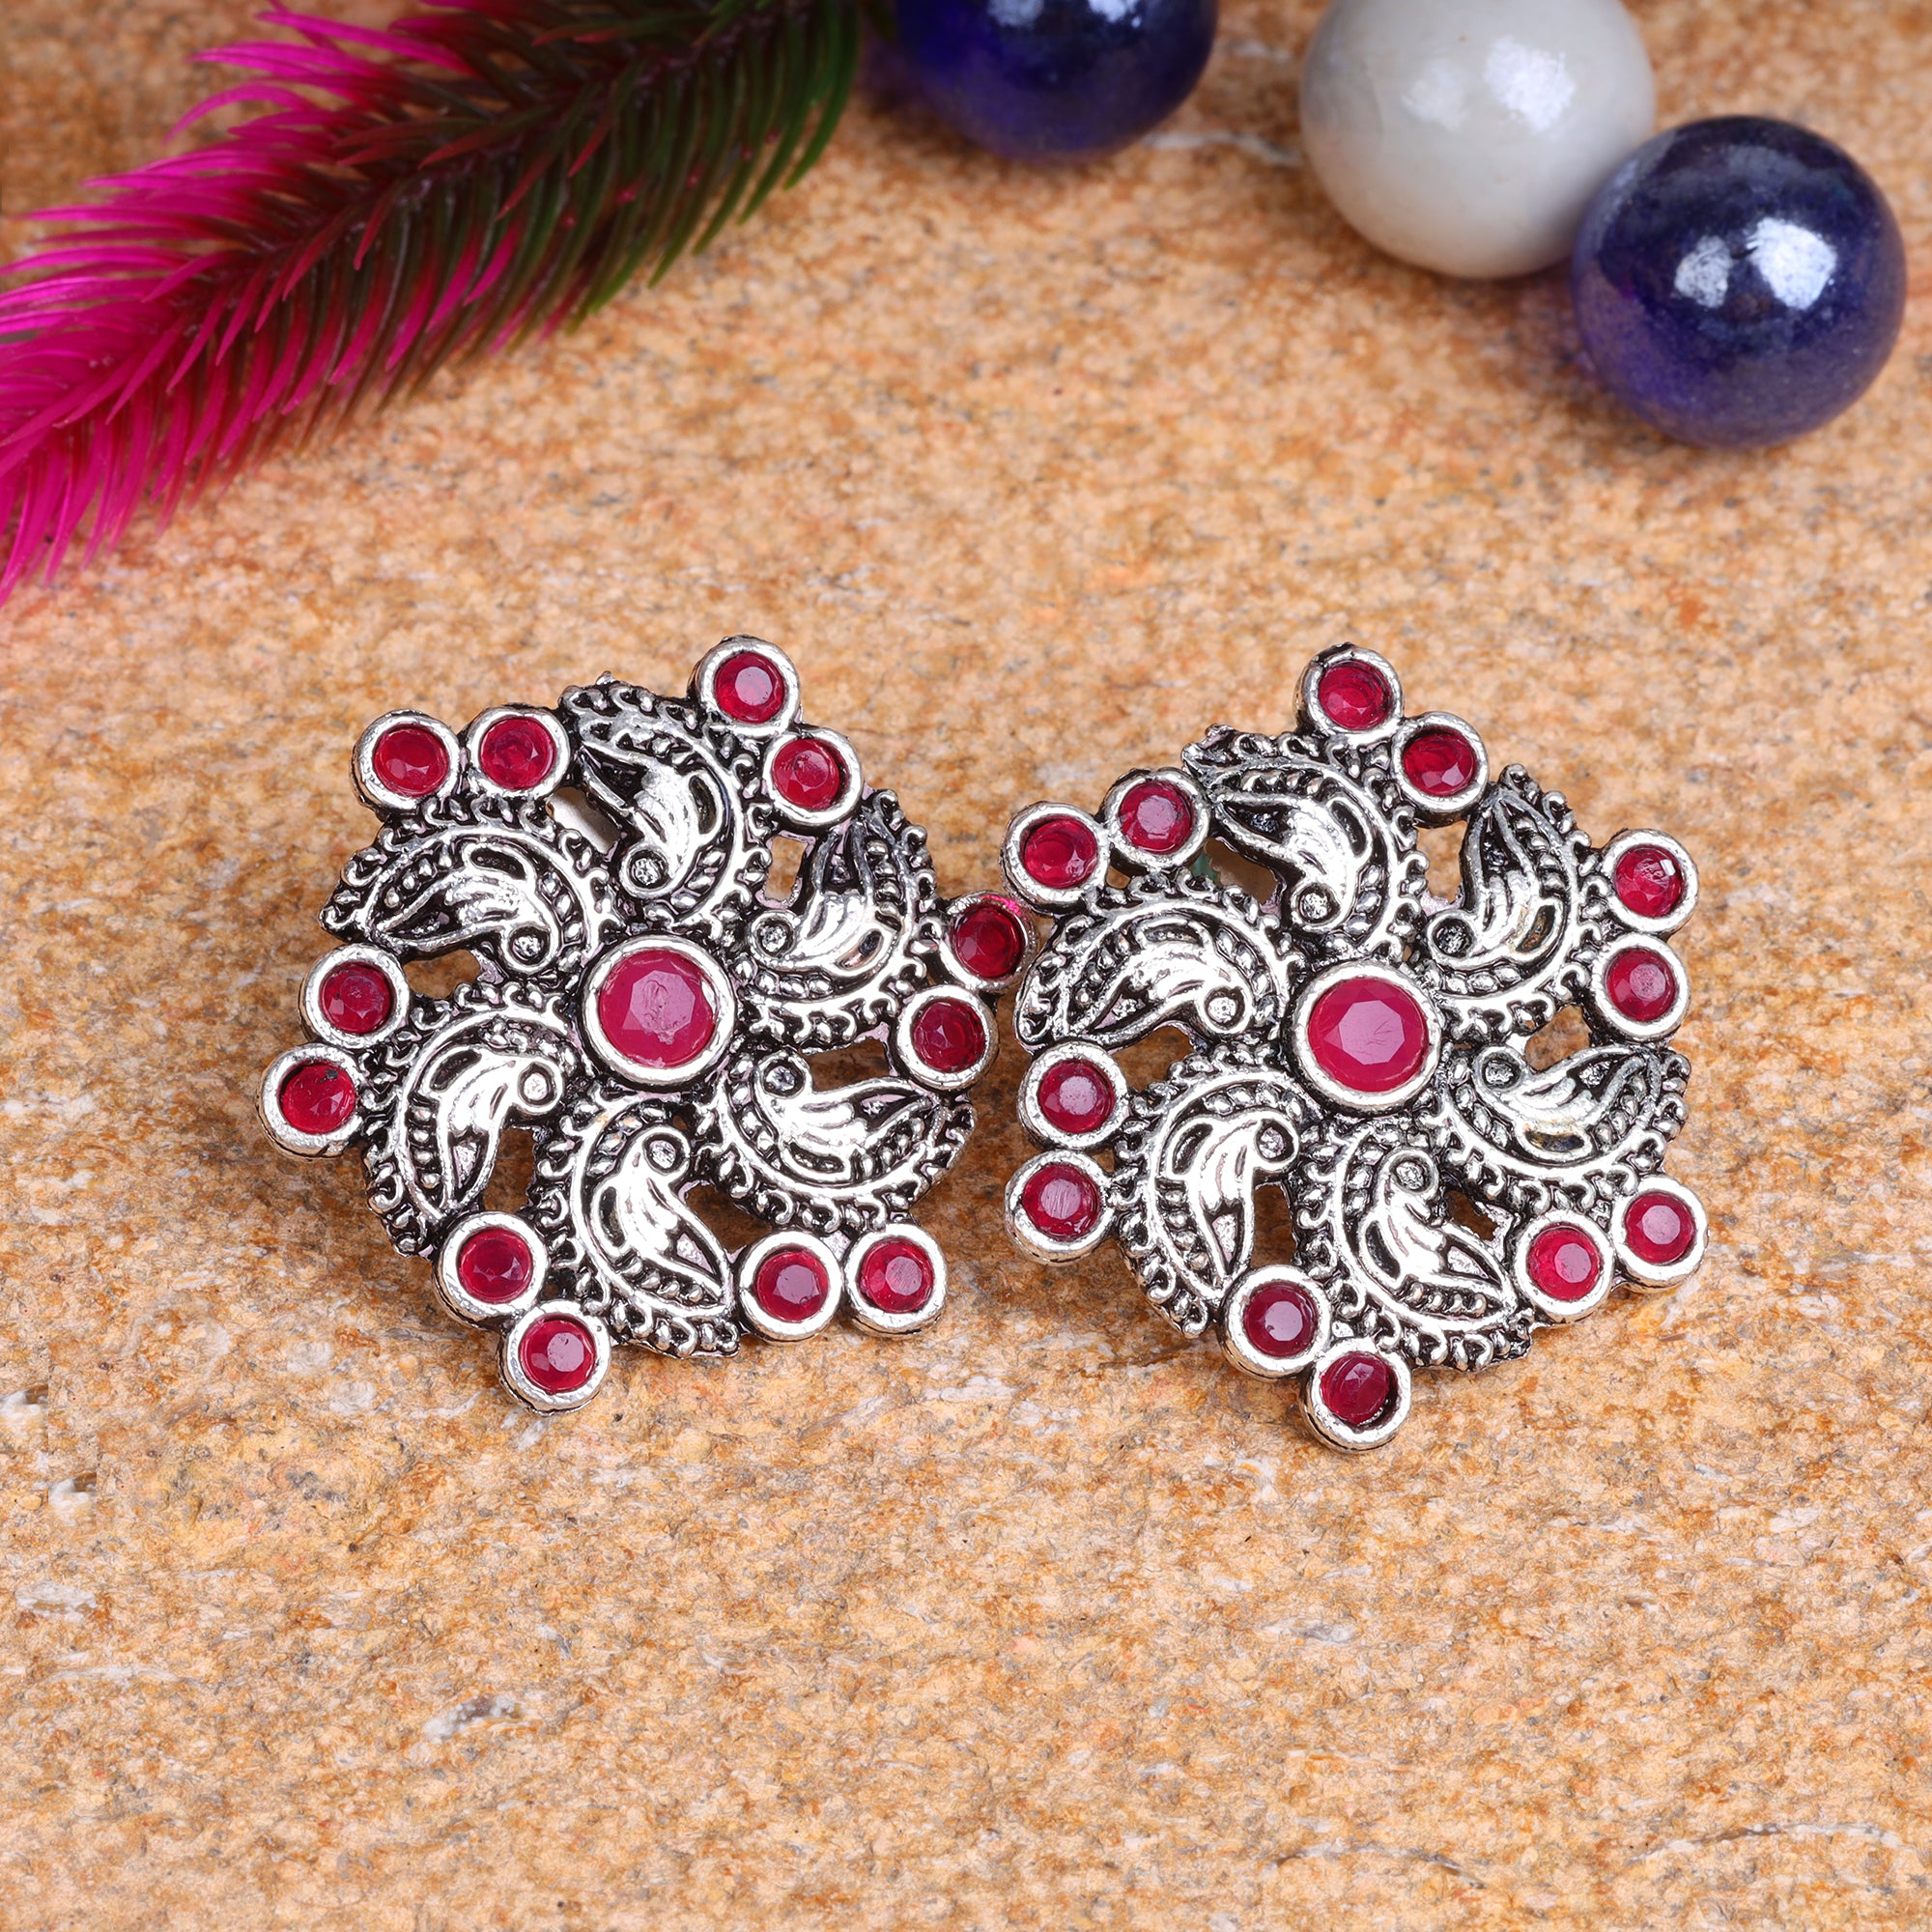 antique silver stud earring\ with red stone earrings\925 sterling  traditional — Discovered